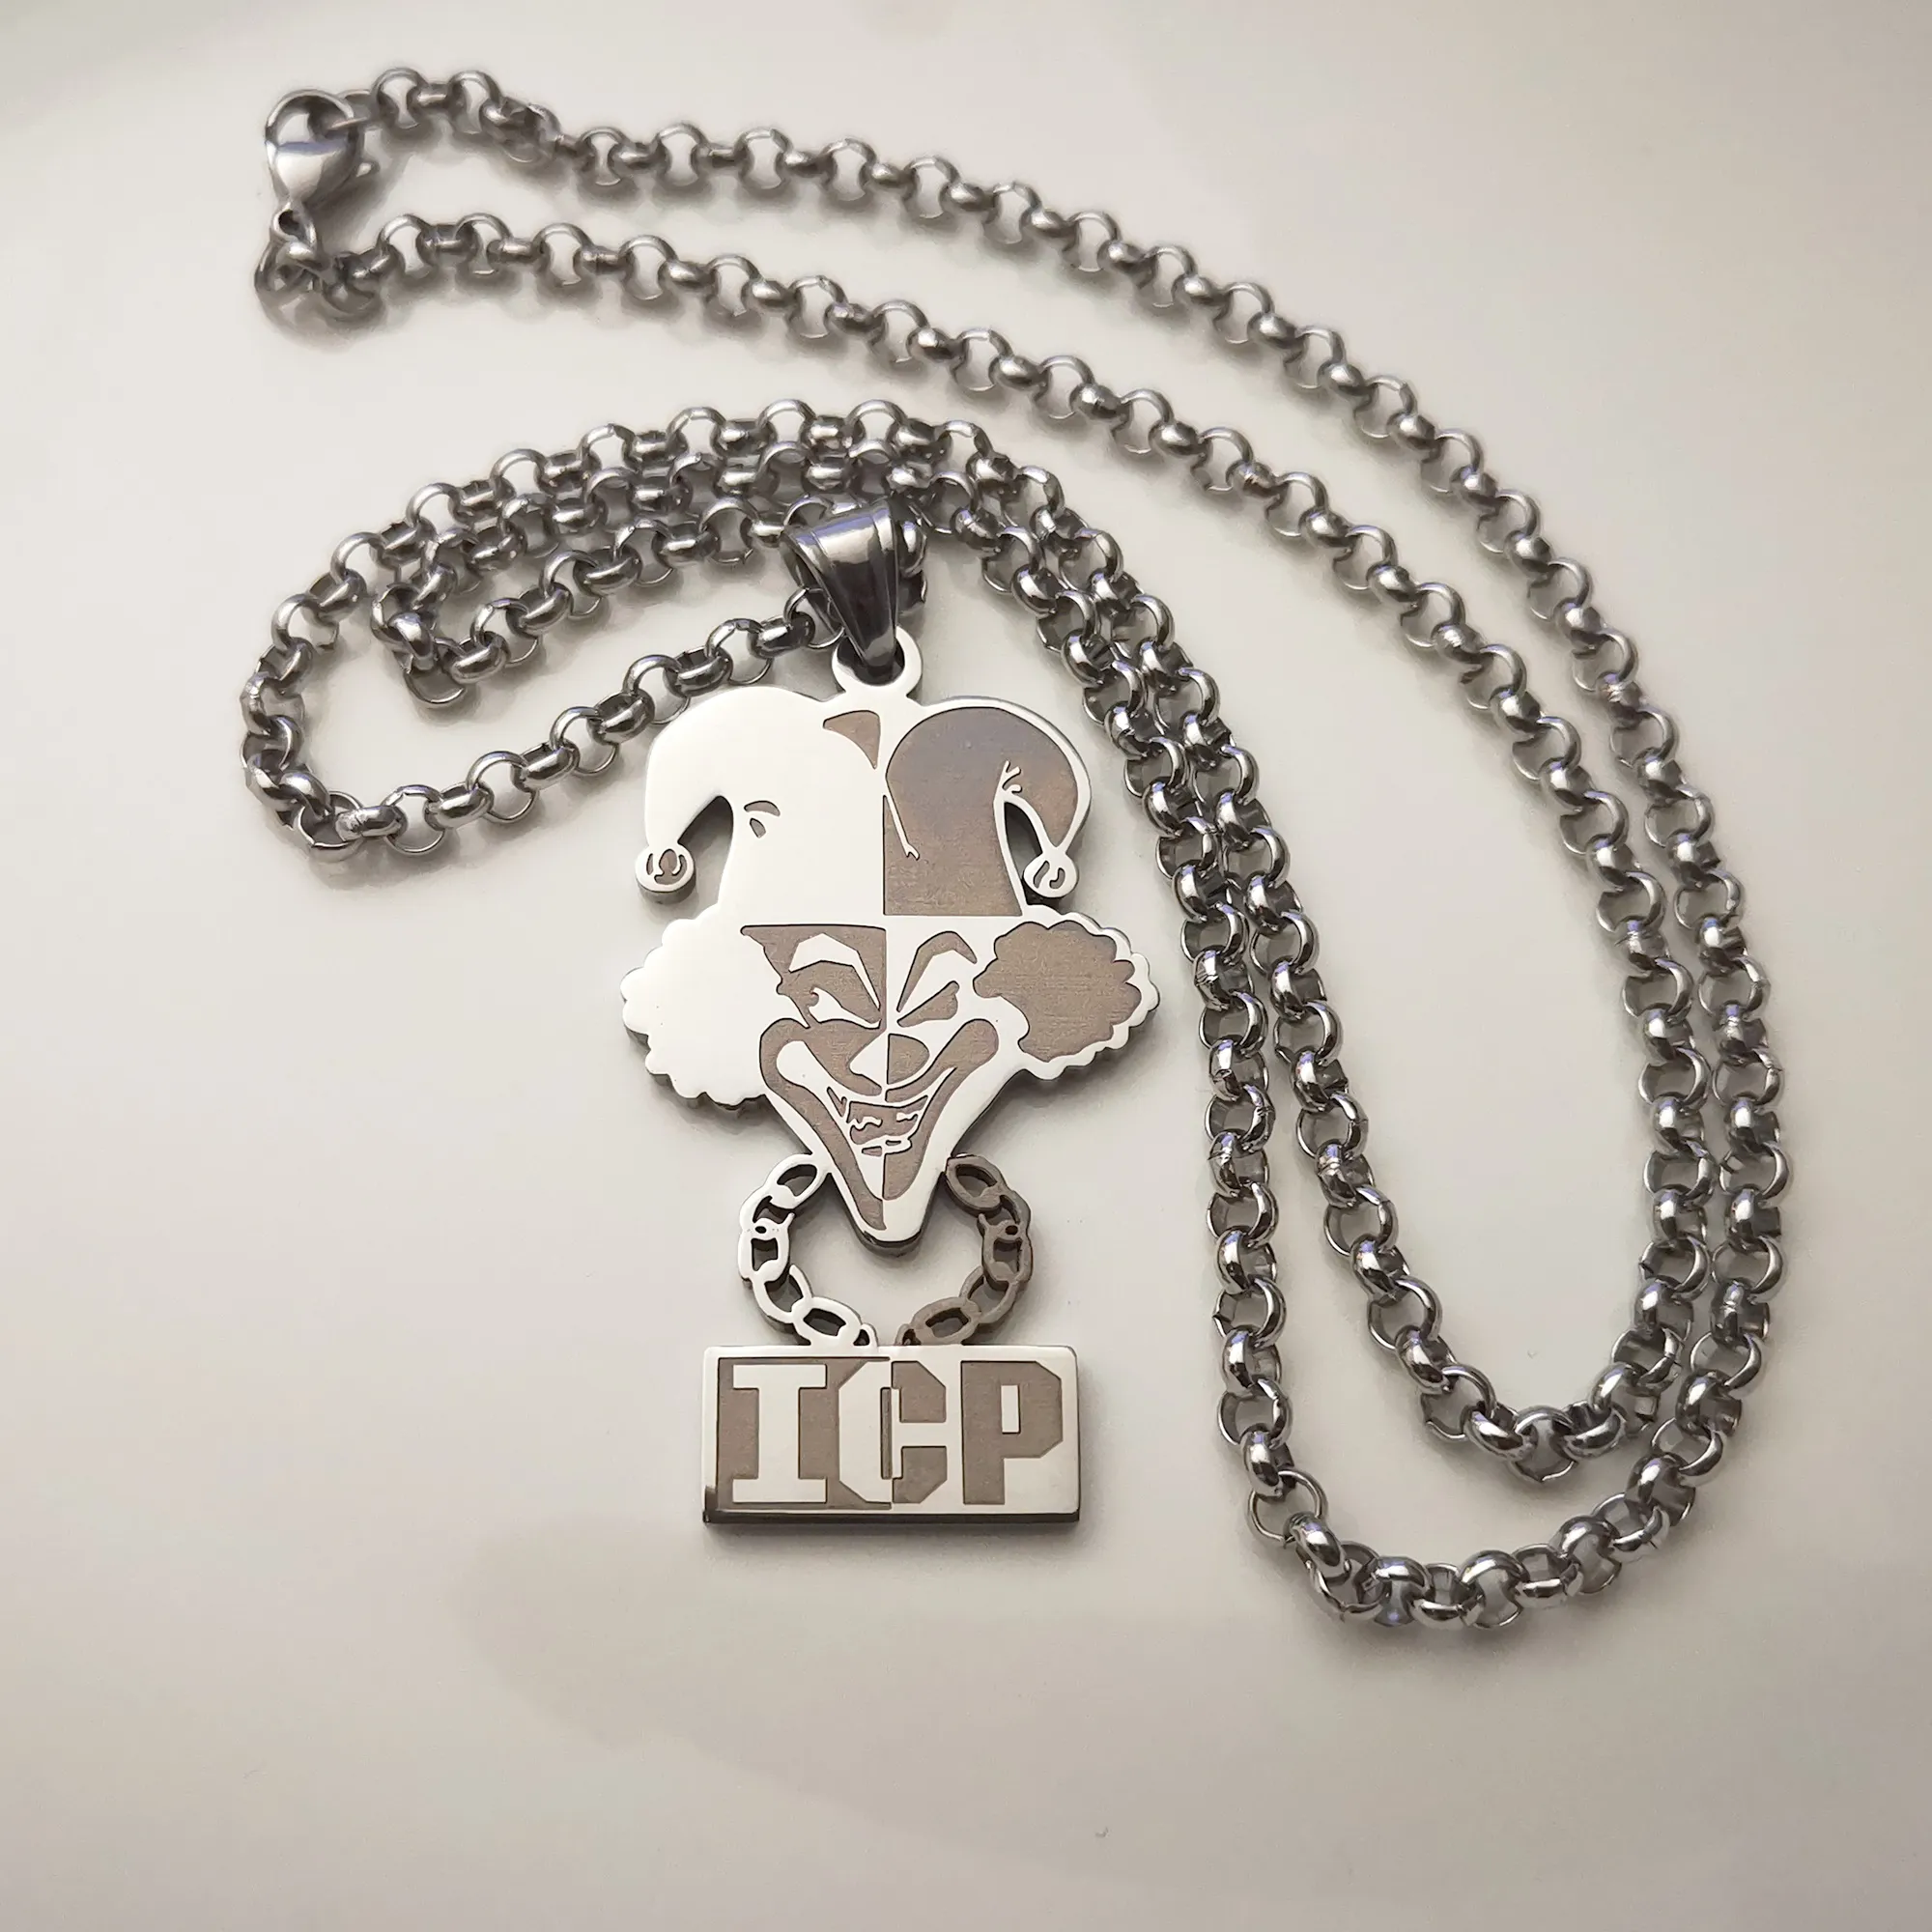 High Polished Silver Stainless Steel ICP CLOWN TWIZTID PENDANT CHARM NECKLACE 4mm 24INCH Rolo CHAIN Jugallo for Mens1810